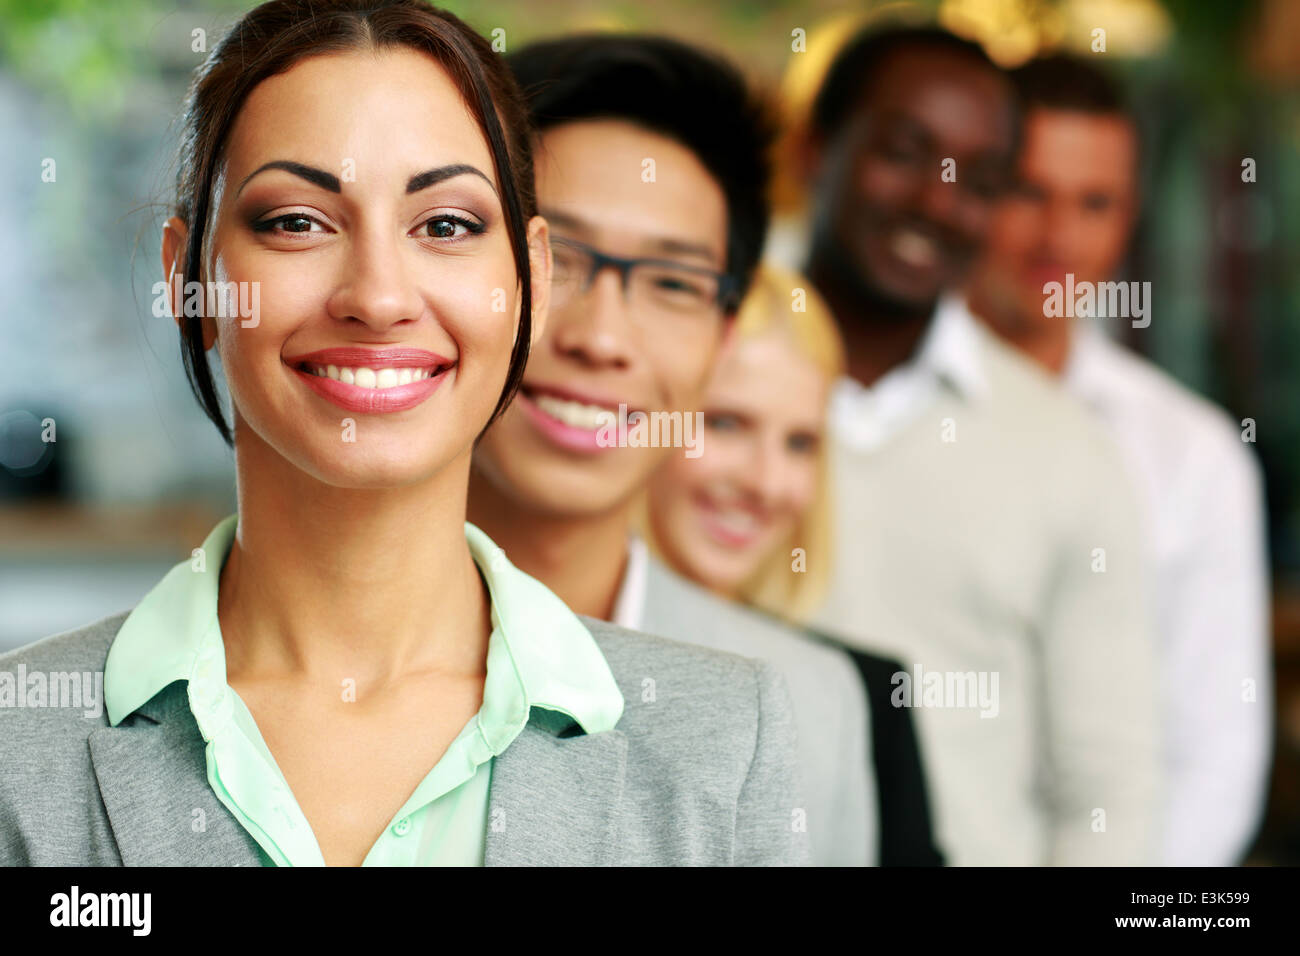 Smiling businesswoman standing in front of colleagues Stock Photo